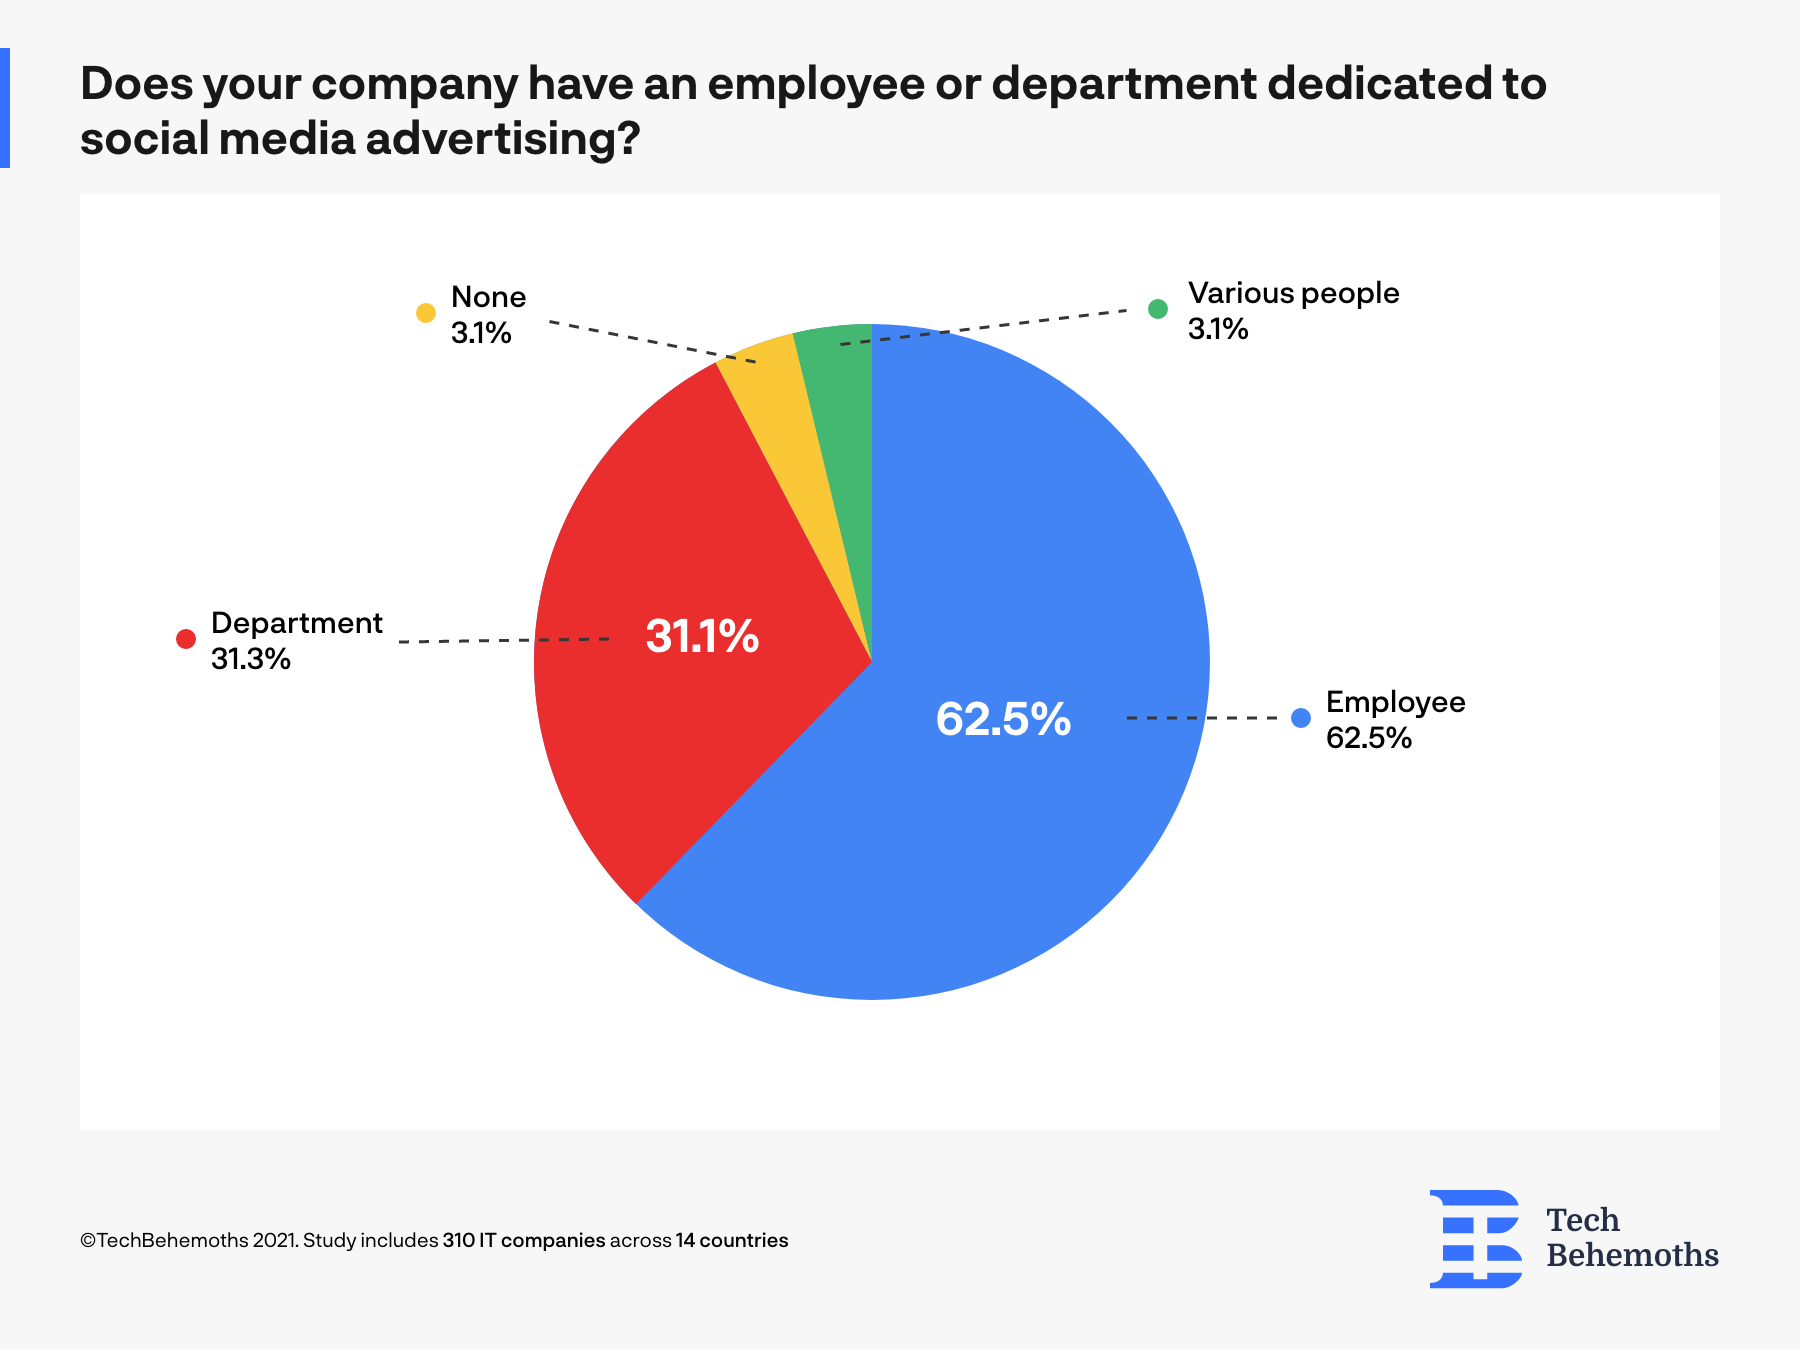 most of IT companies have at least an employee dedicated for social media activities